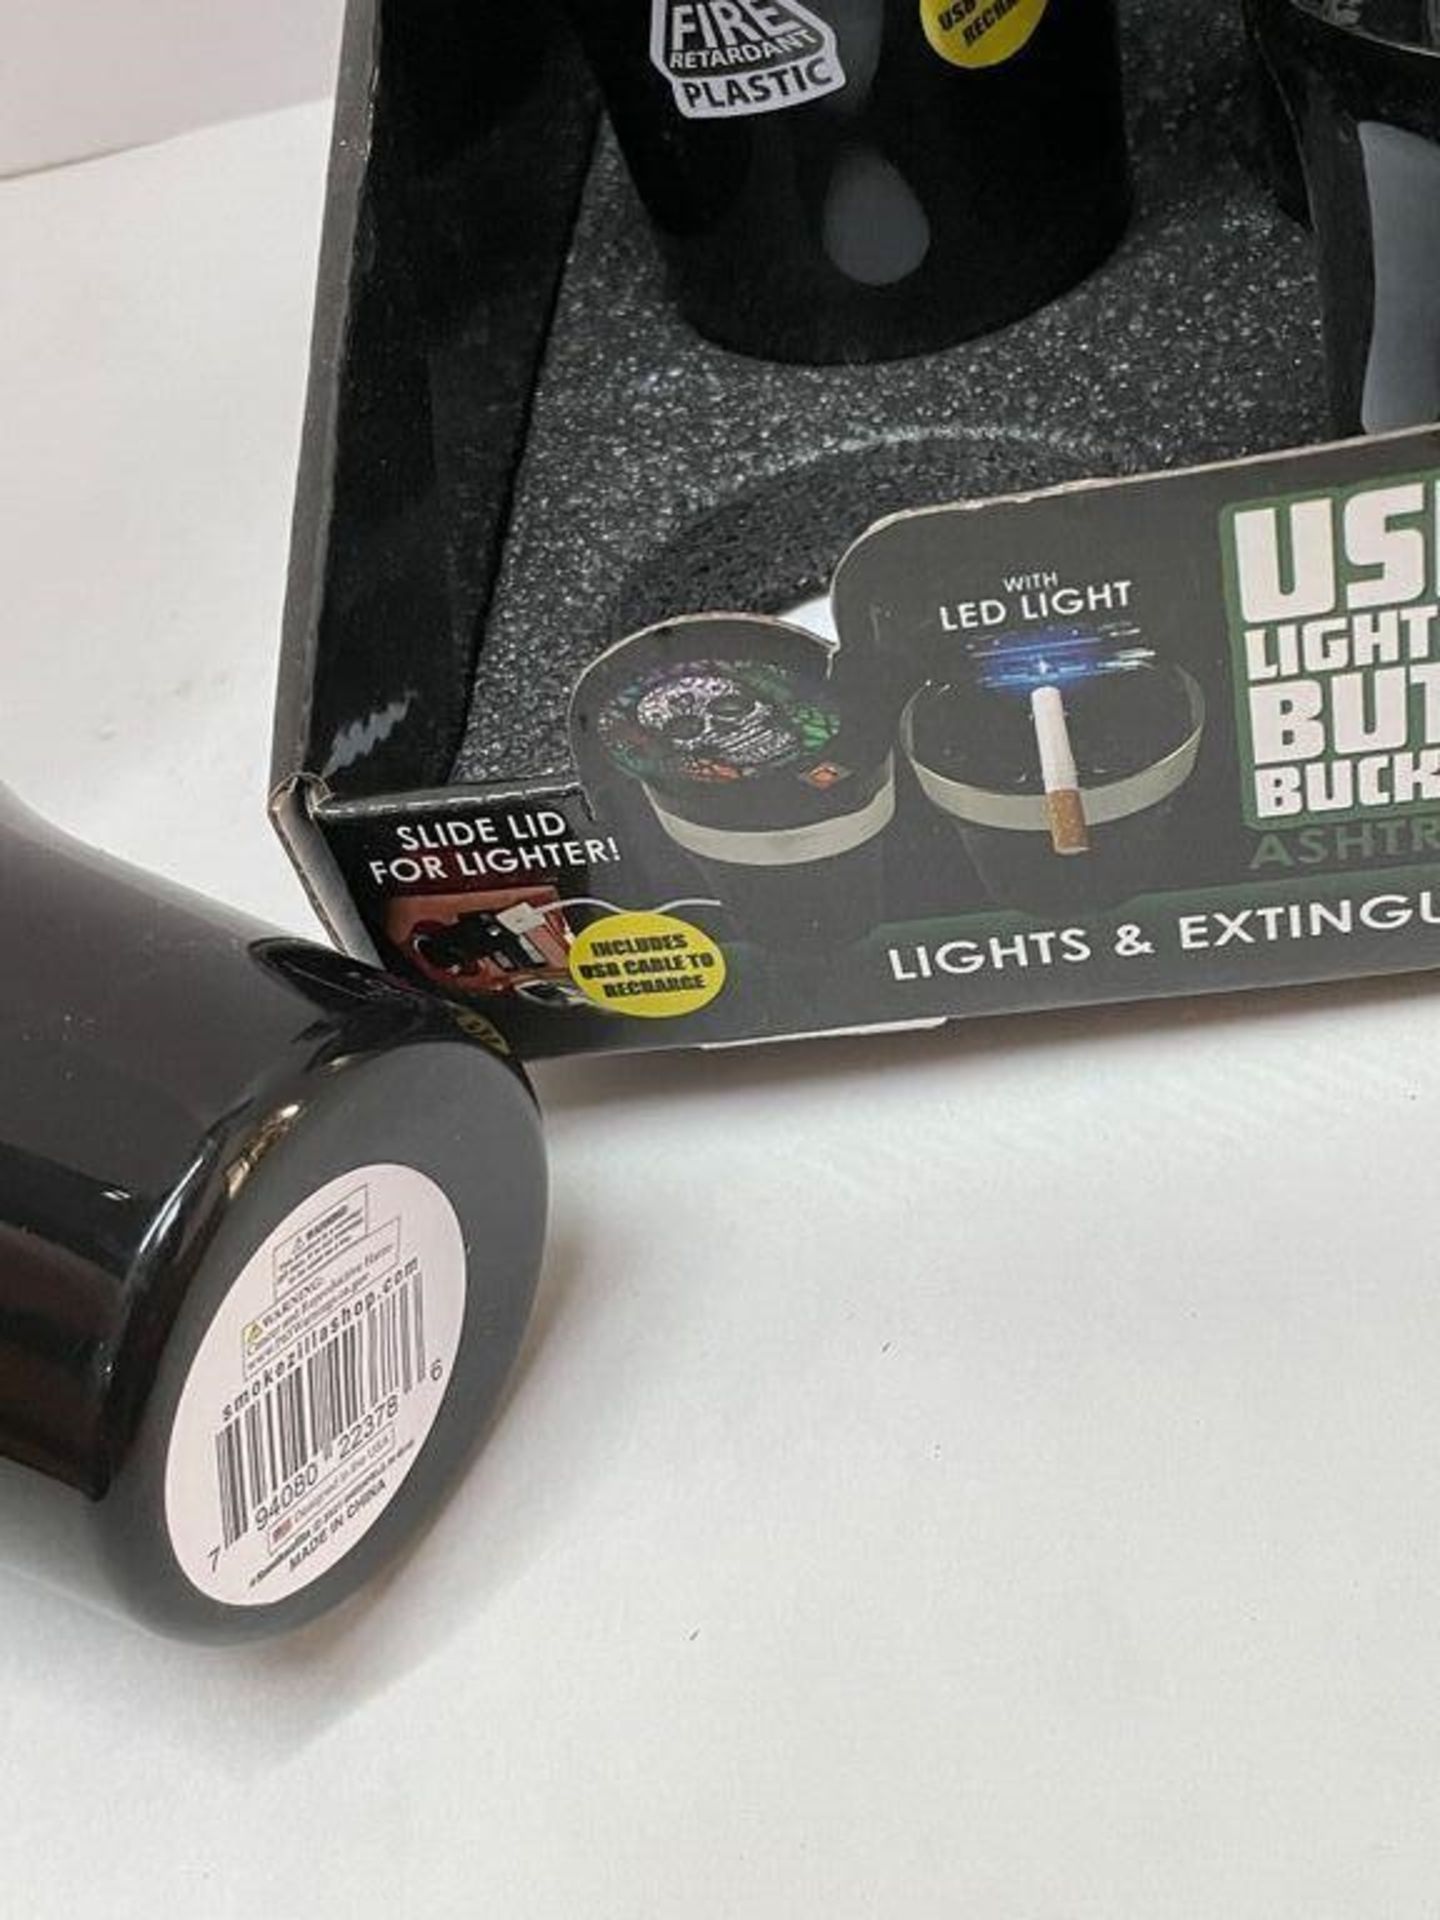 6 X USB LIGHTER BUTT BUCKET ASHTRAYS WITH LED LIGHTS IN DISPLAY CASE - Image 4 of 4